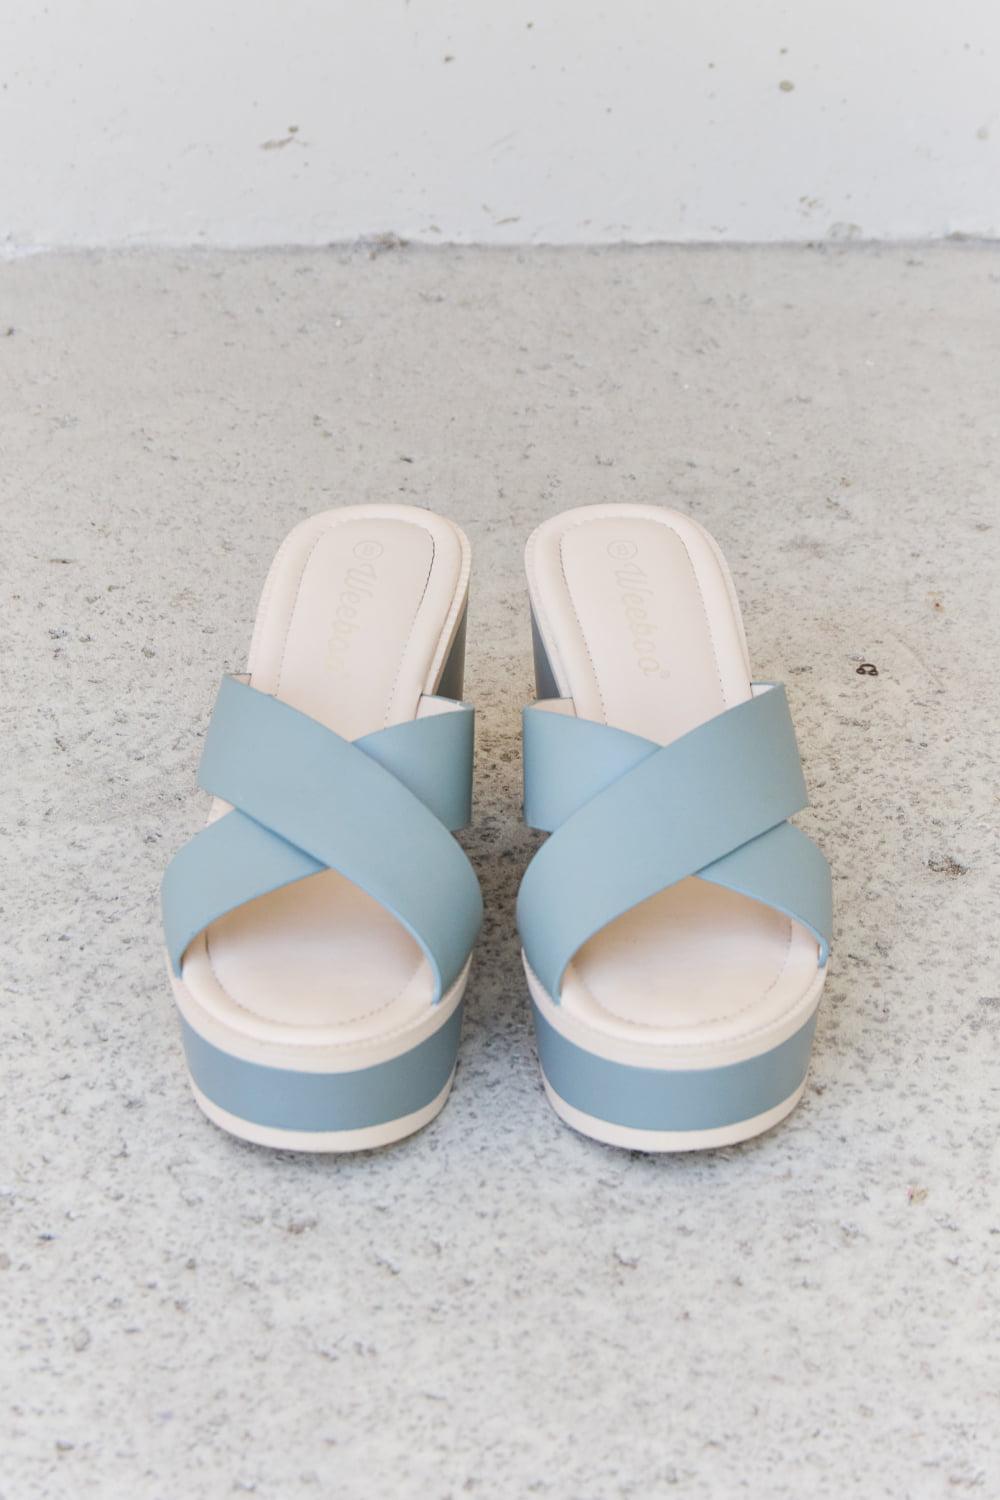 Weeboo Cherish The Moments Contrast Platform Sandals in Misty Blue BLUE ZONE PLANET